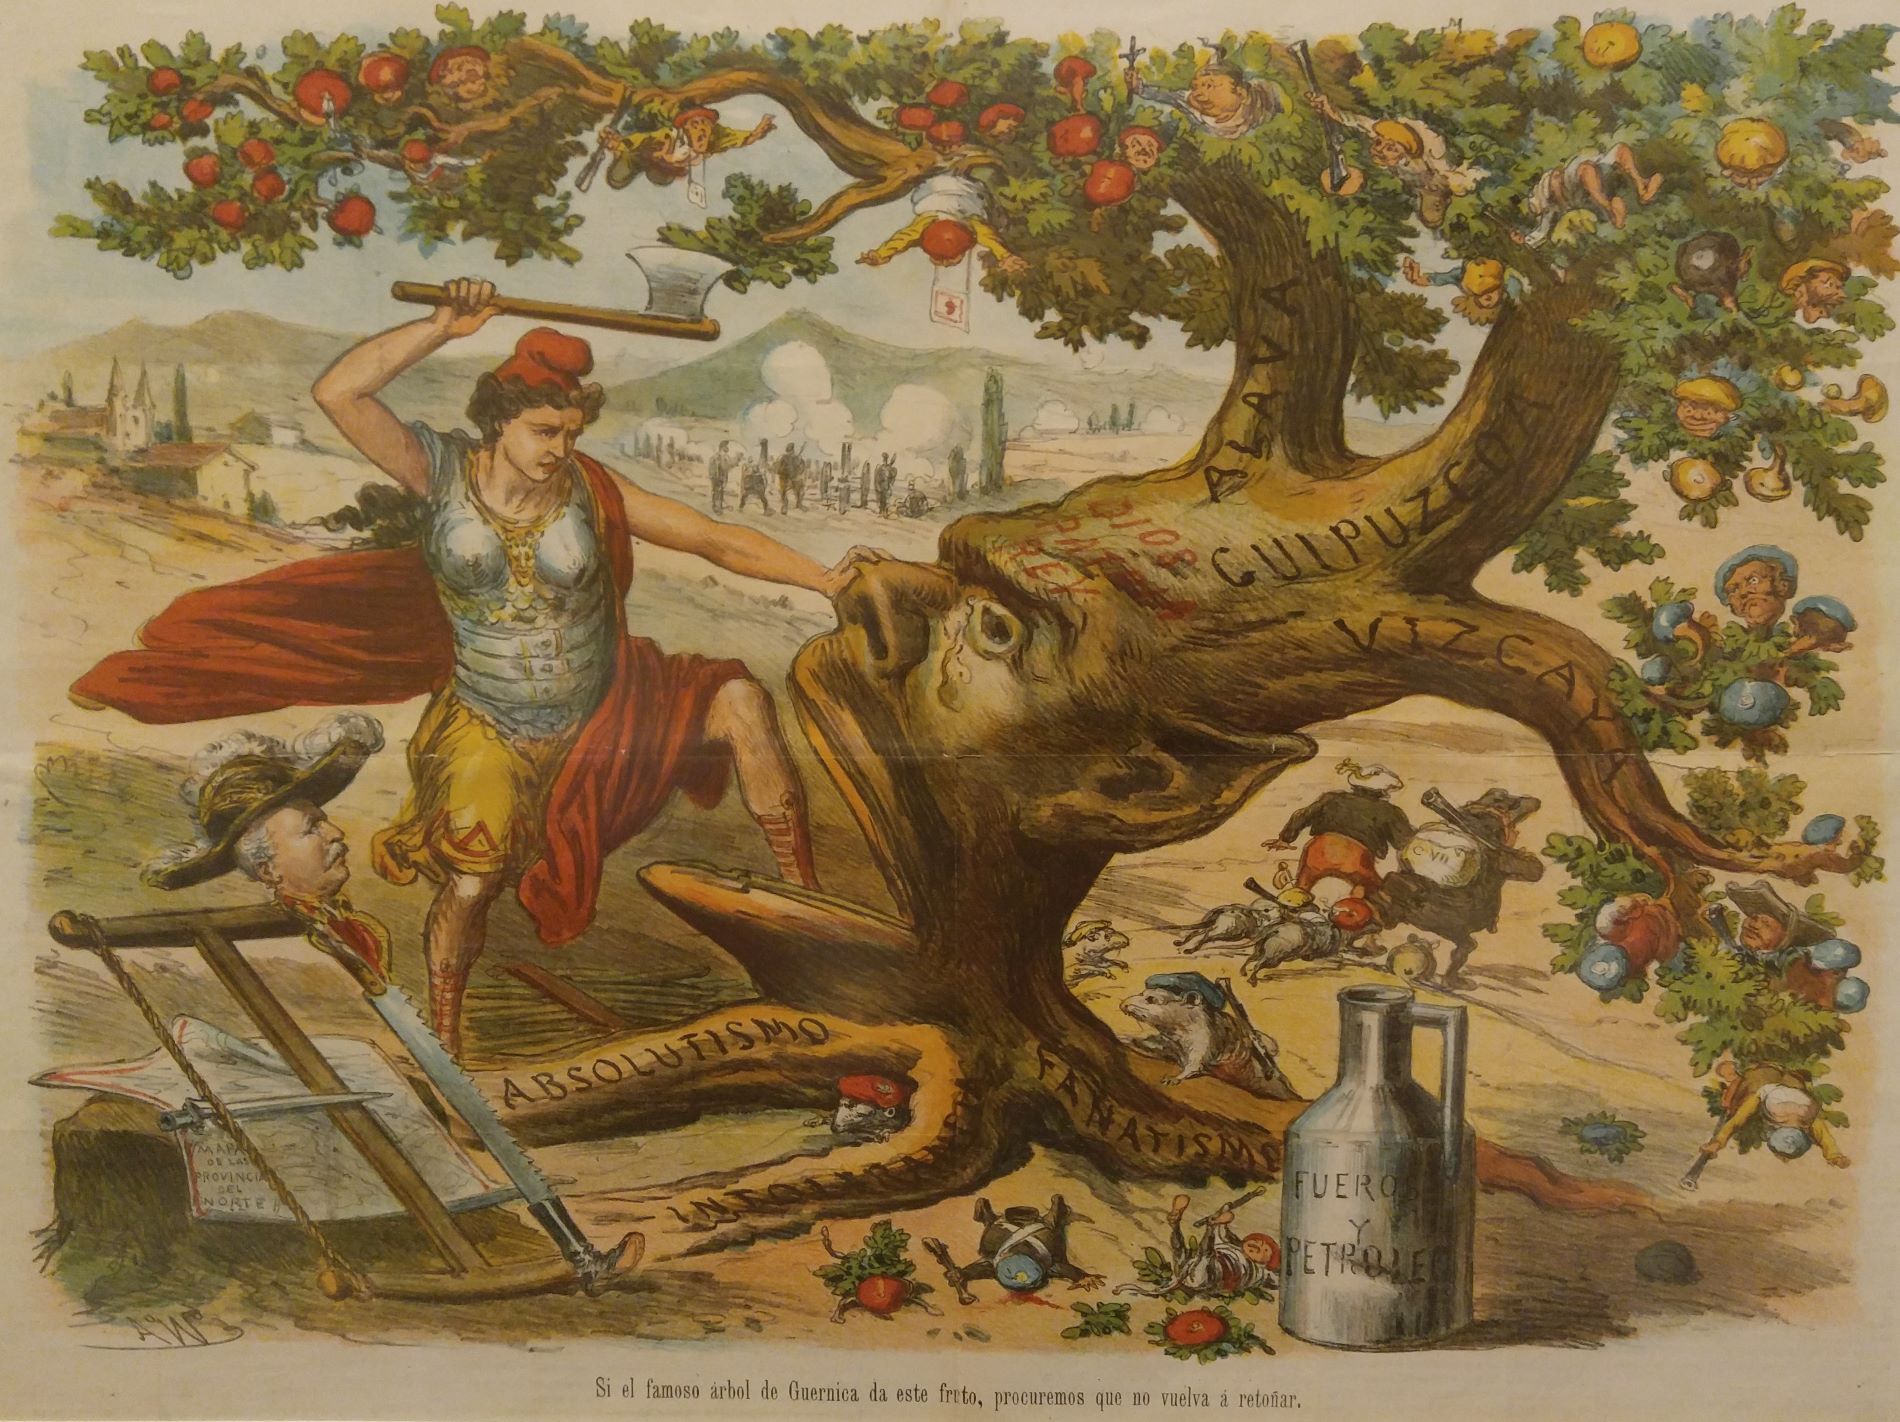 Colorful cartoon of the Tree of Gernika being chopped down by a person in armor